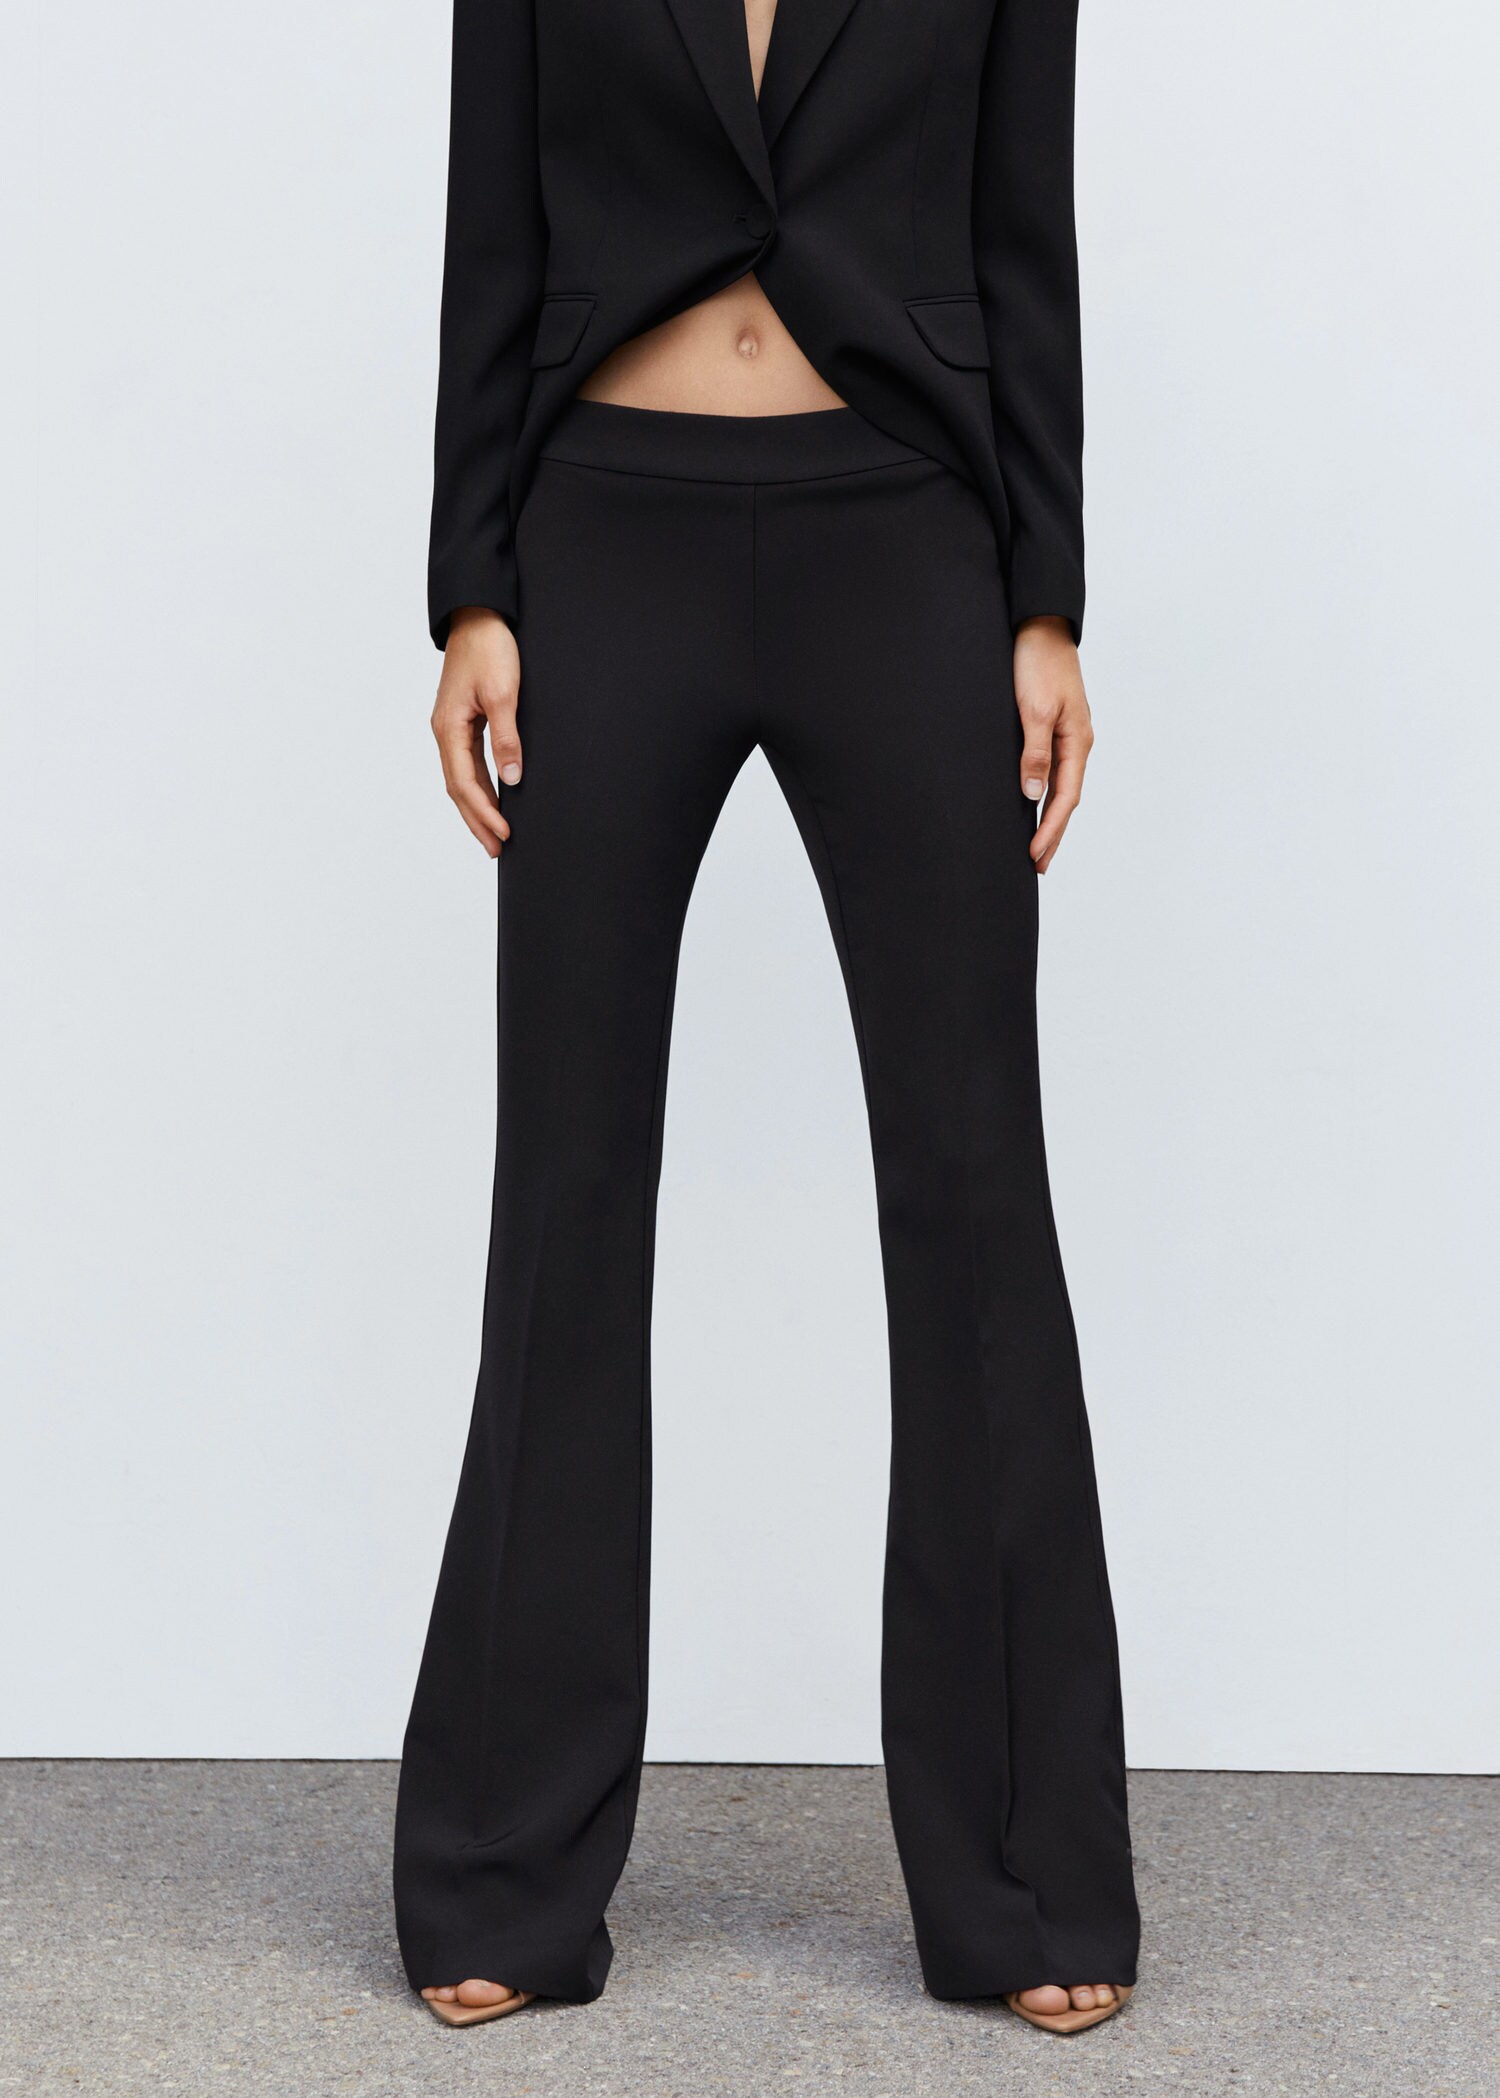 Flared trouser suit